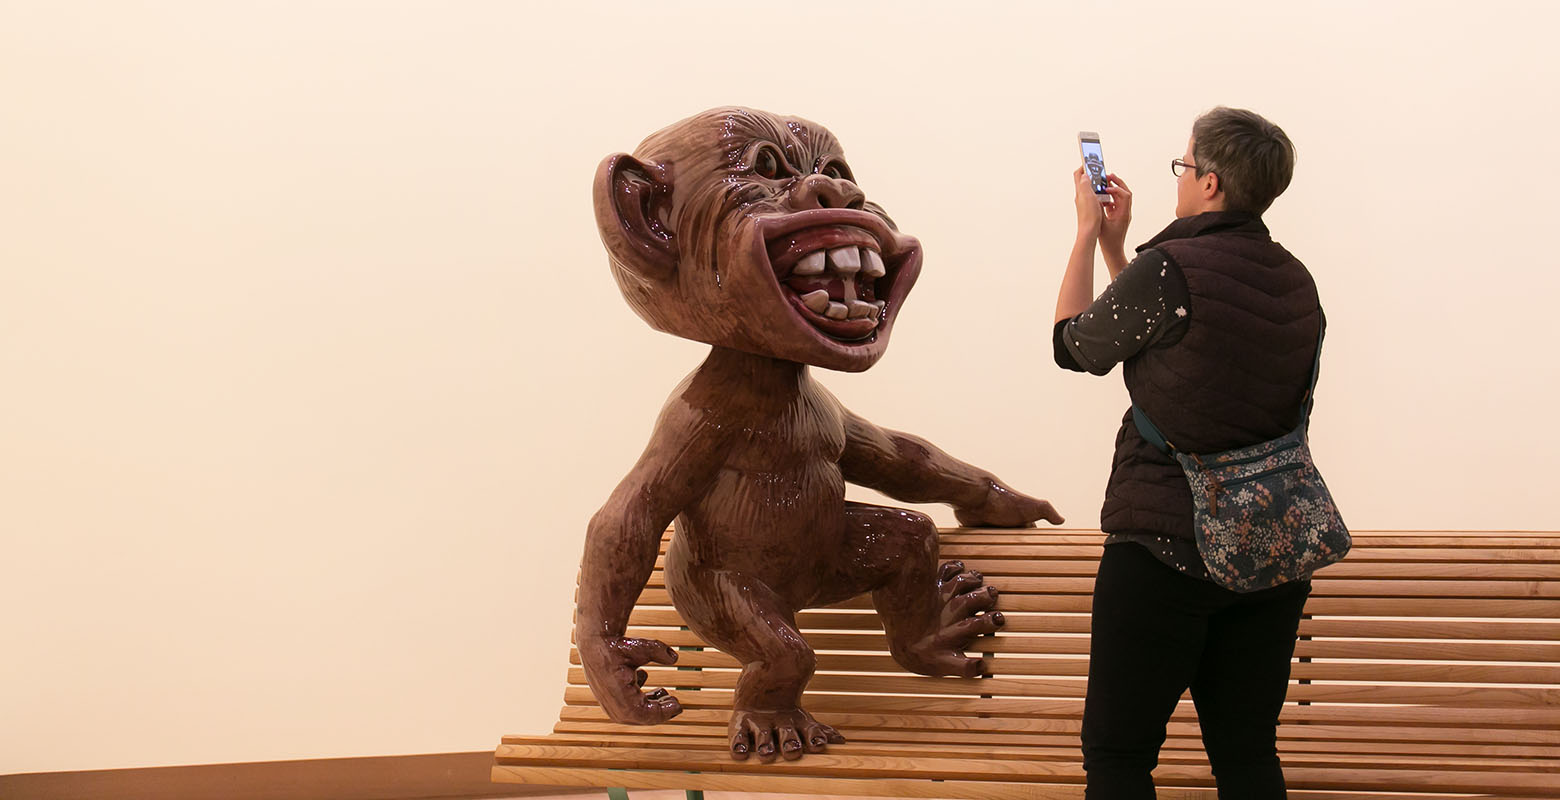 A woman takes a photo of Tiki Tour, an highly glossy sculpture of a monkey